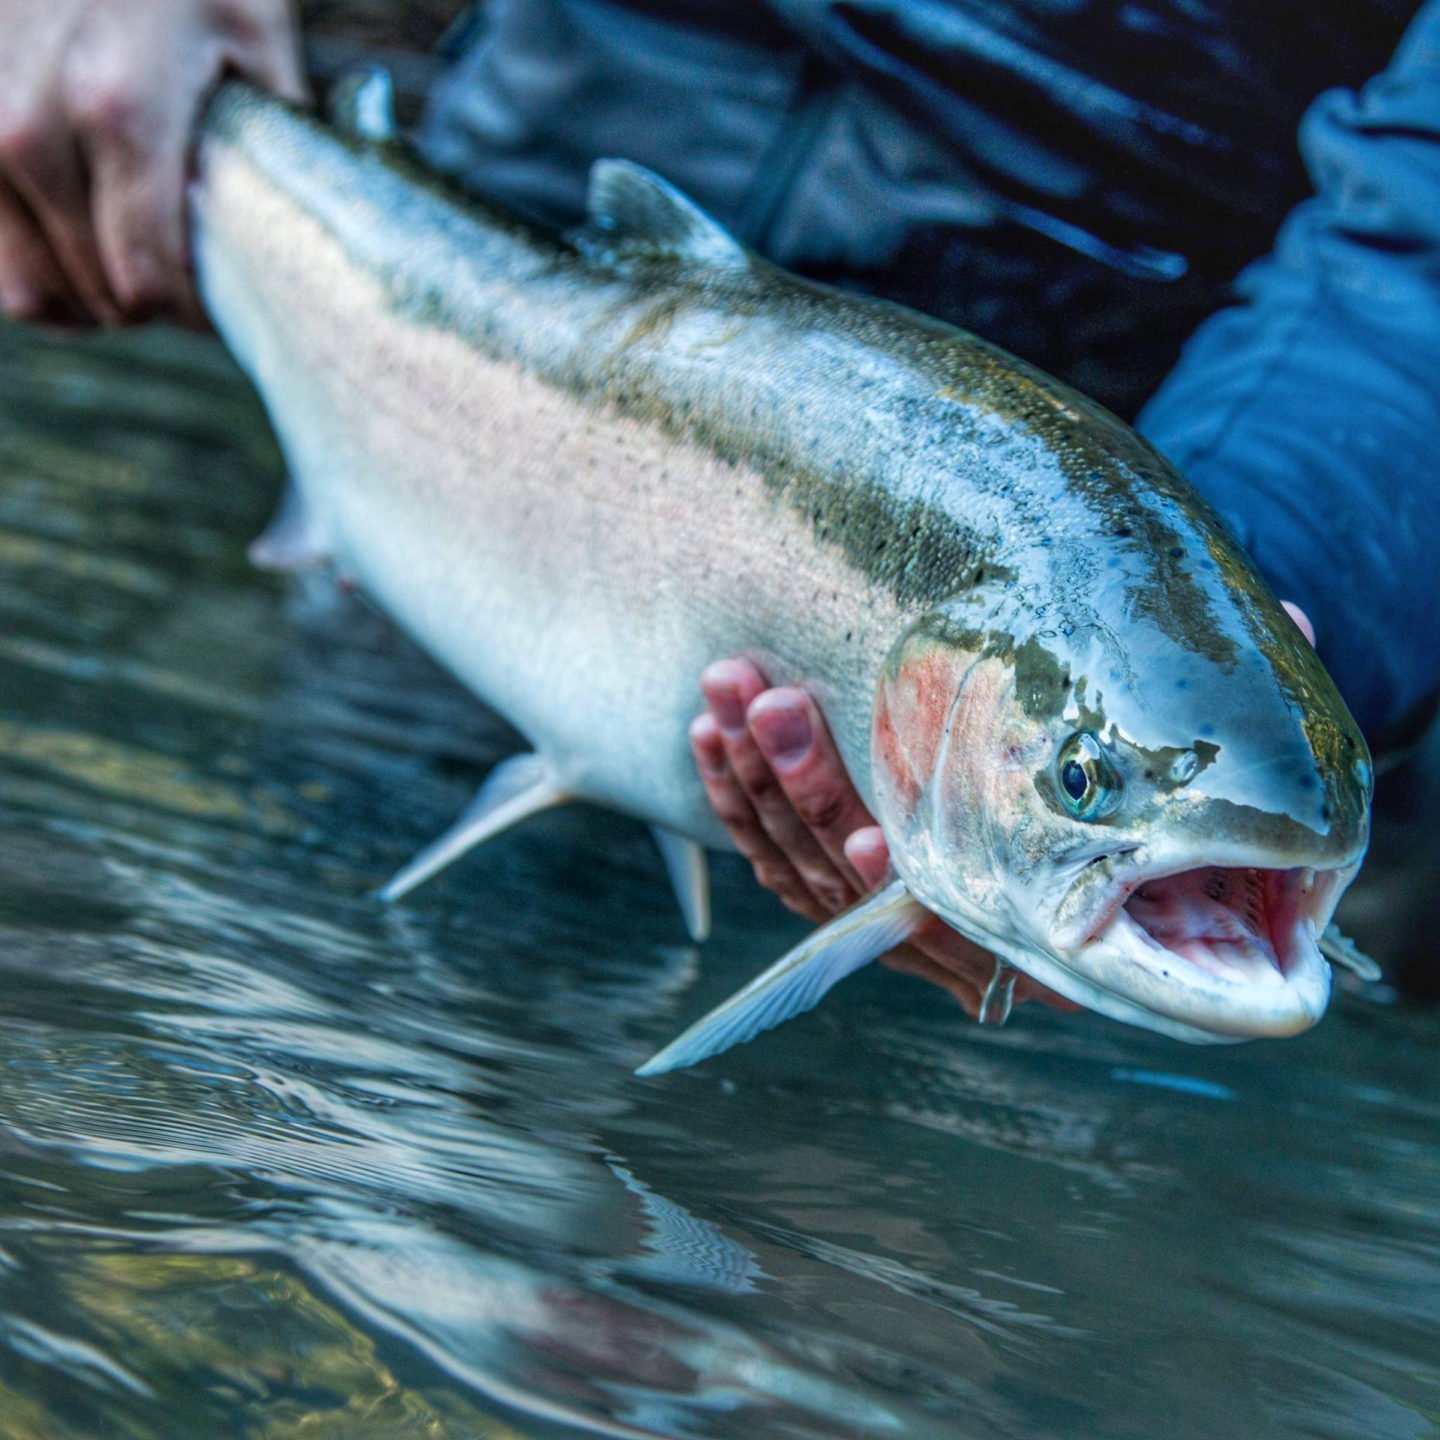 wild steelhead trout before being released into the Pacific Northwest